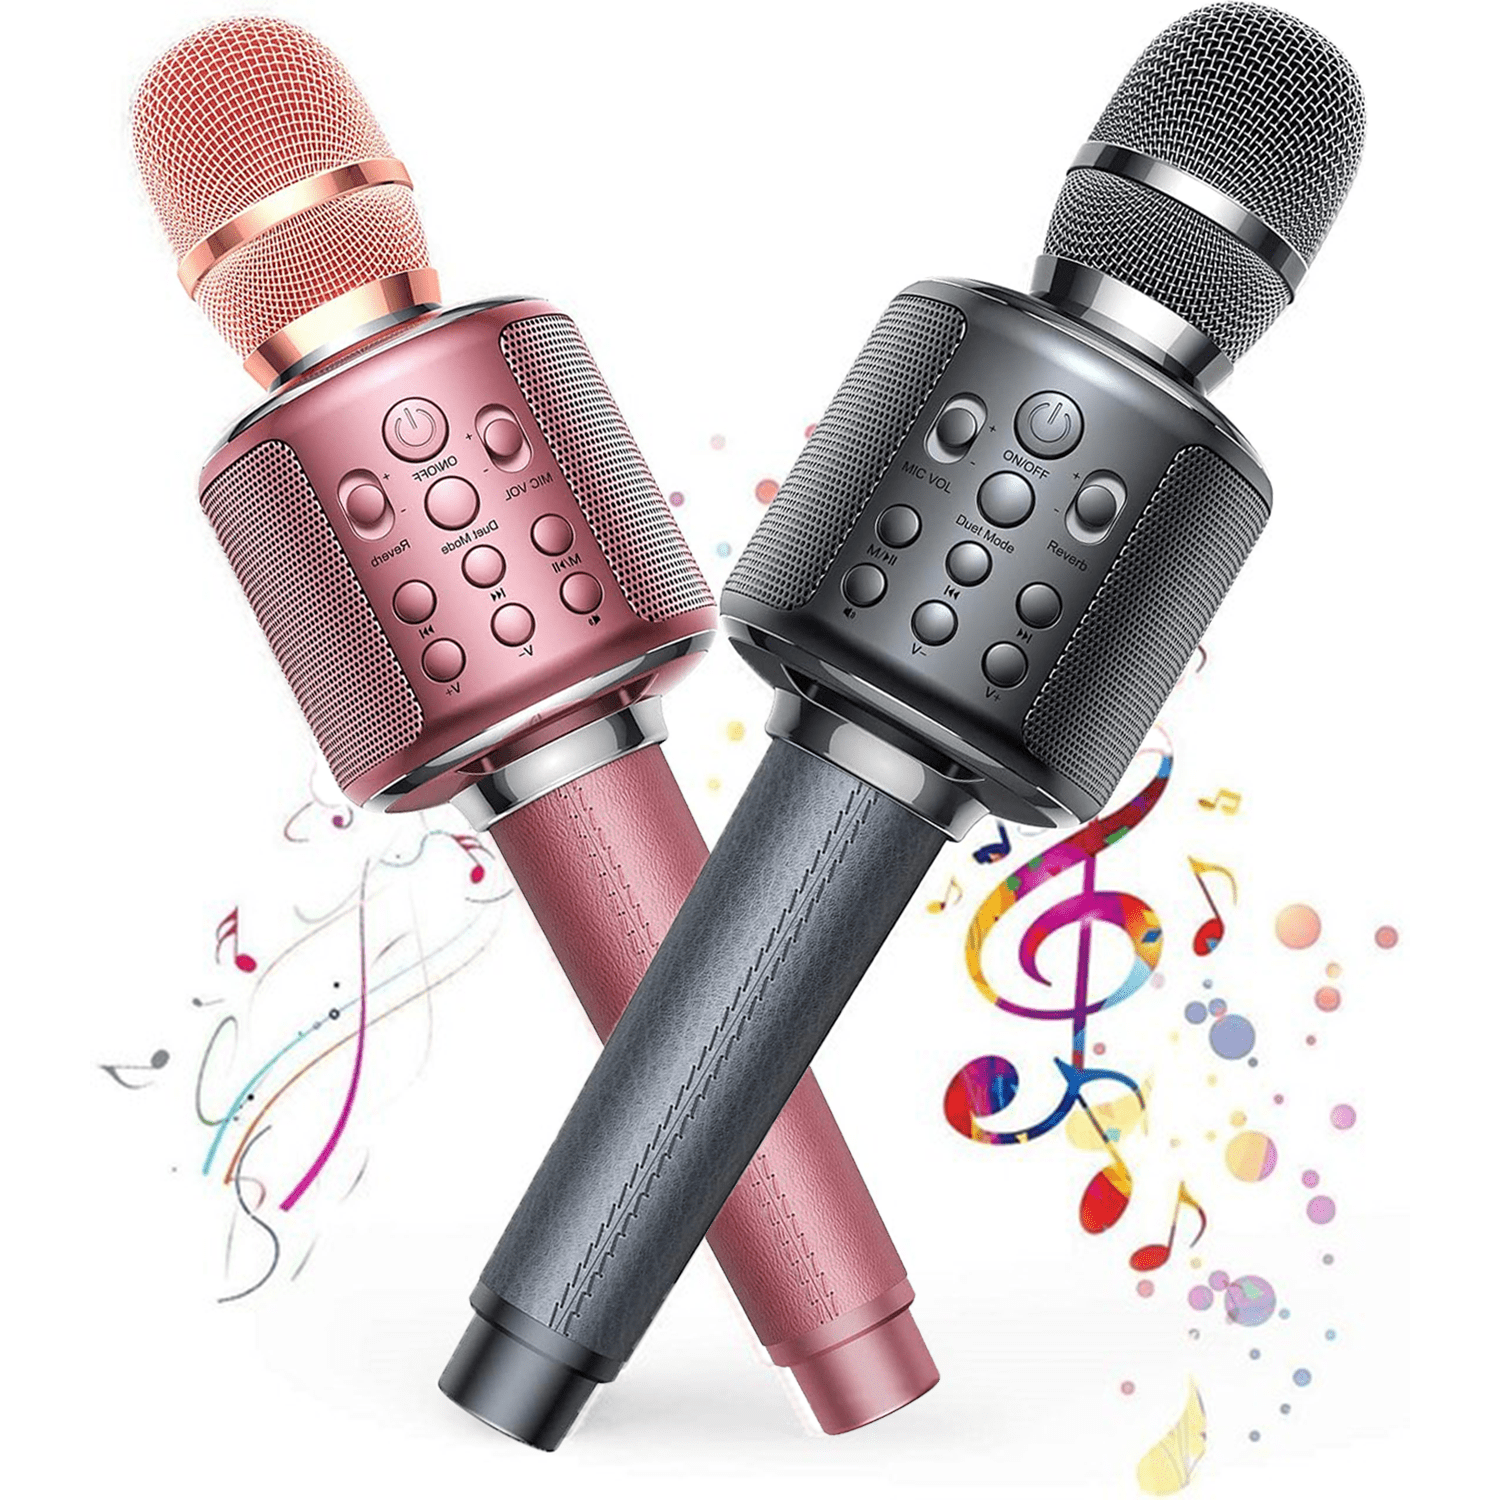 Wireless Bluetooth Karaoke Microphone Premium Portable Handheld Microphone Built-in Speaker with Multi-Function Professional Karaoke Rechargeable Player for iPhone/Android/iPad/PC etc. y11s 